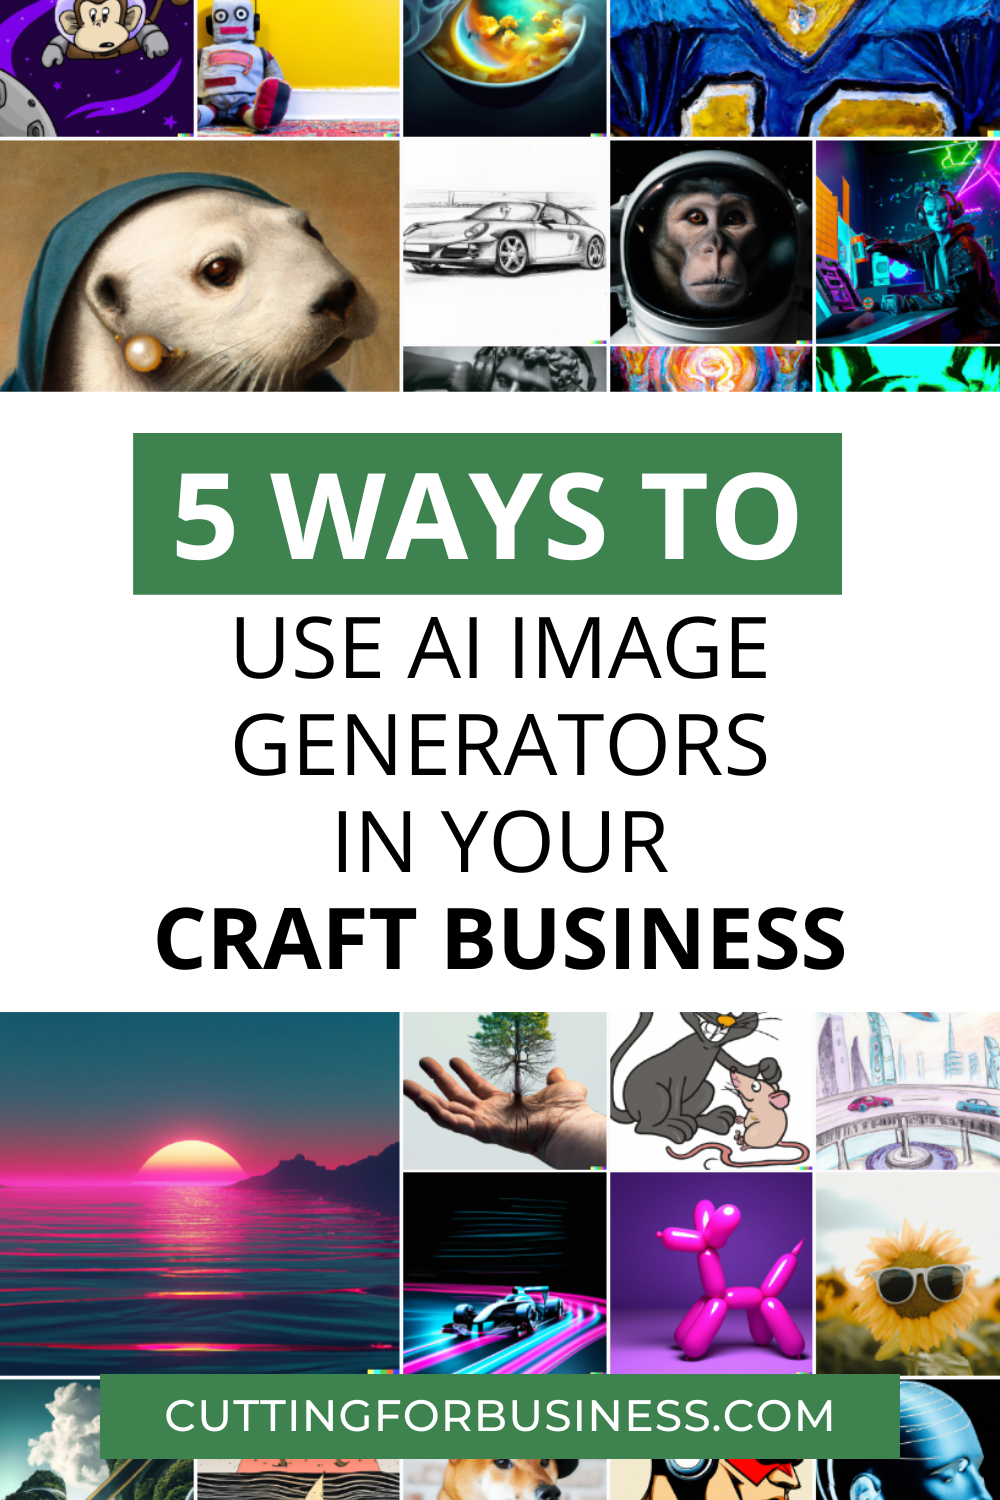 5 Ways to Use Dall-E 2 in Your Craft Business - AI Image Generators - cuttingforbusiness.com.